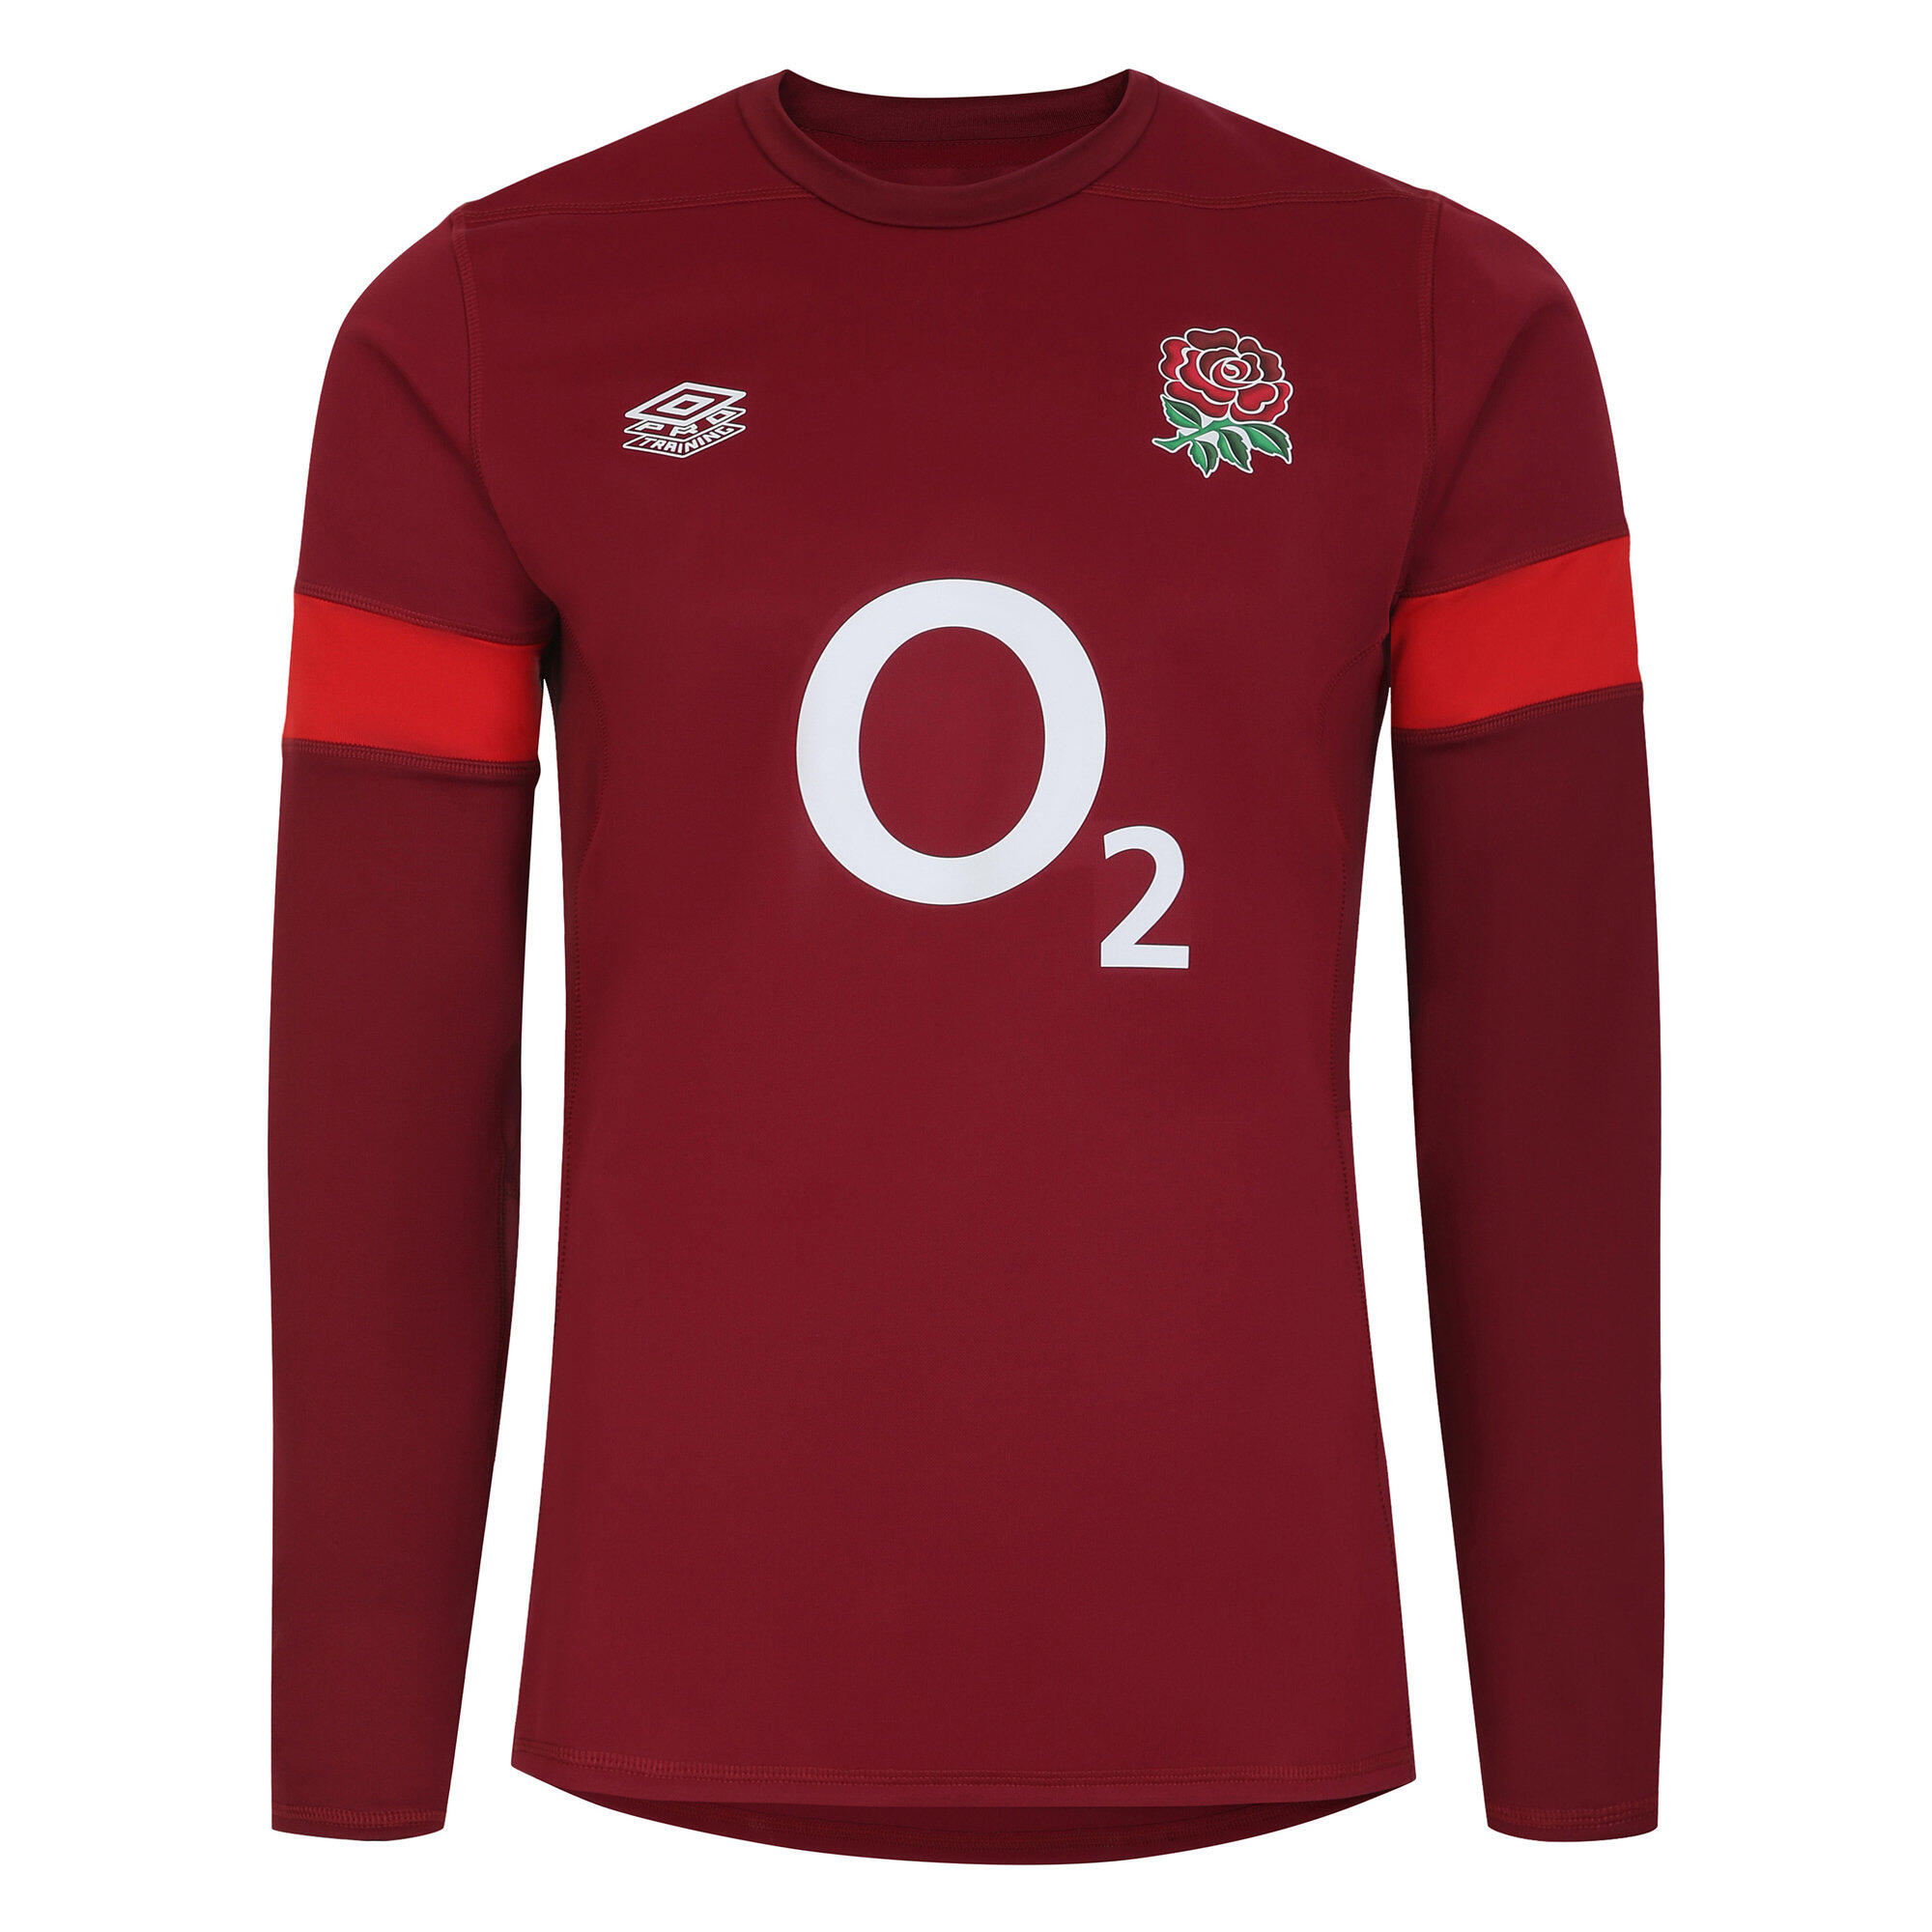 UMBRO Mens England Rugby 23/24 Drill Top (Tibetan Red/Flame Scarlet)